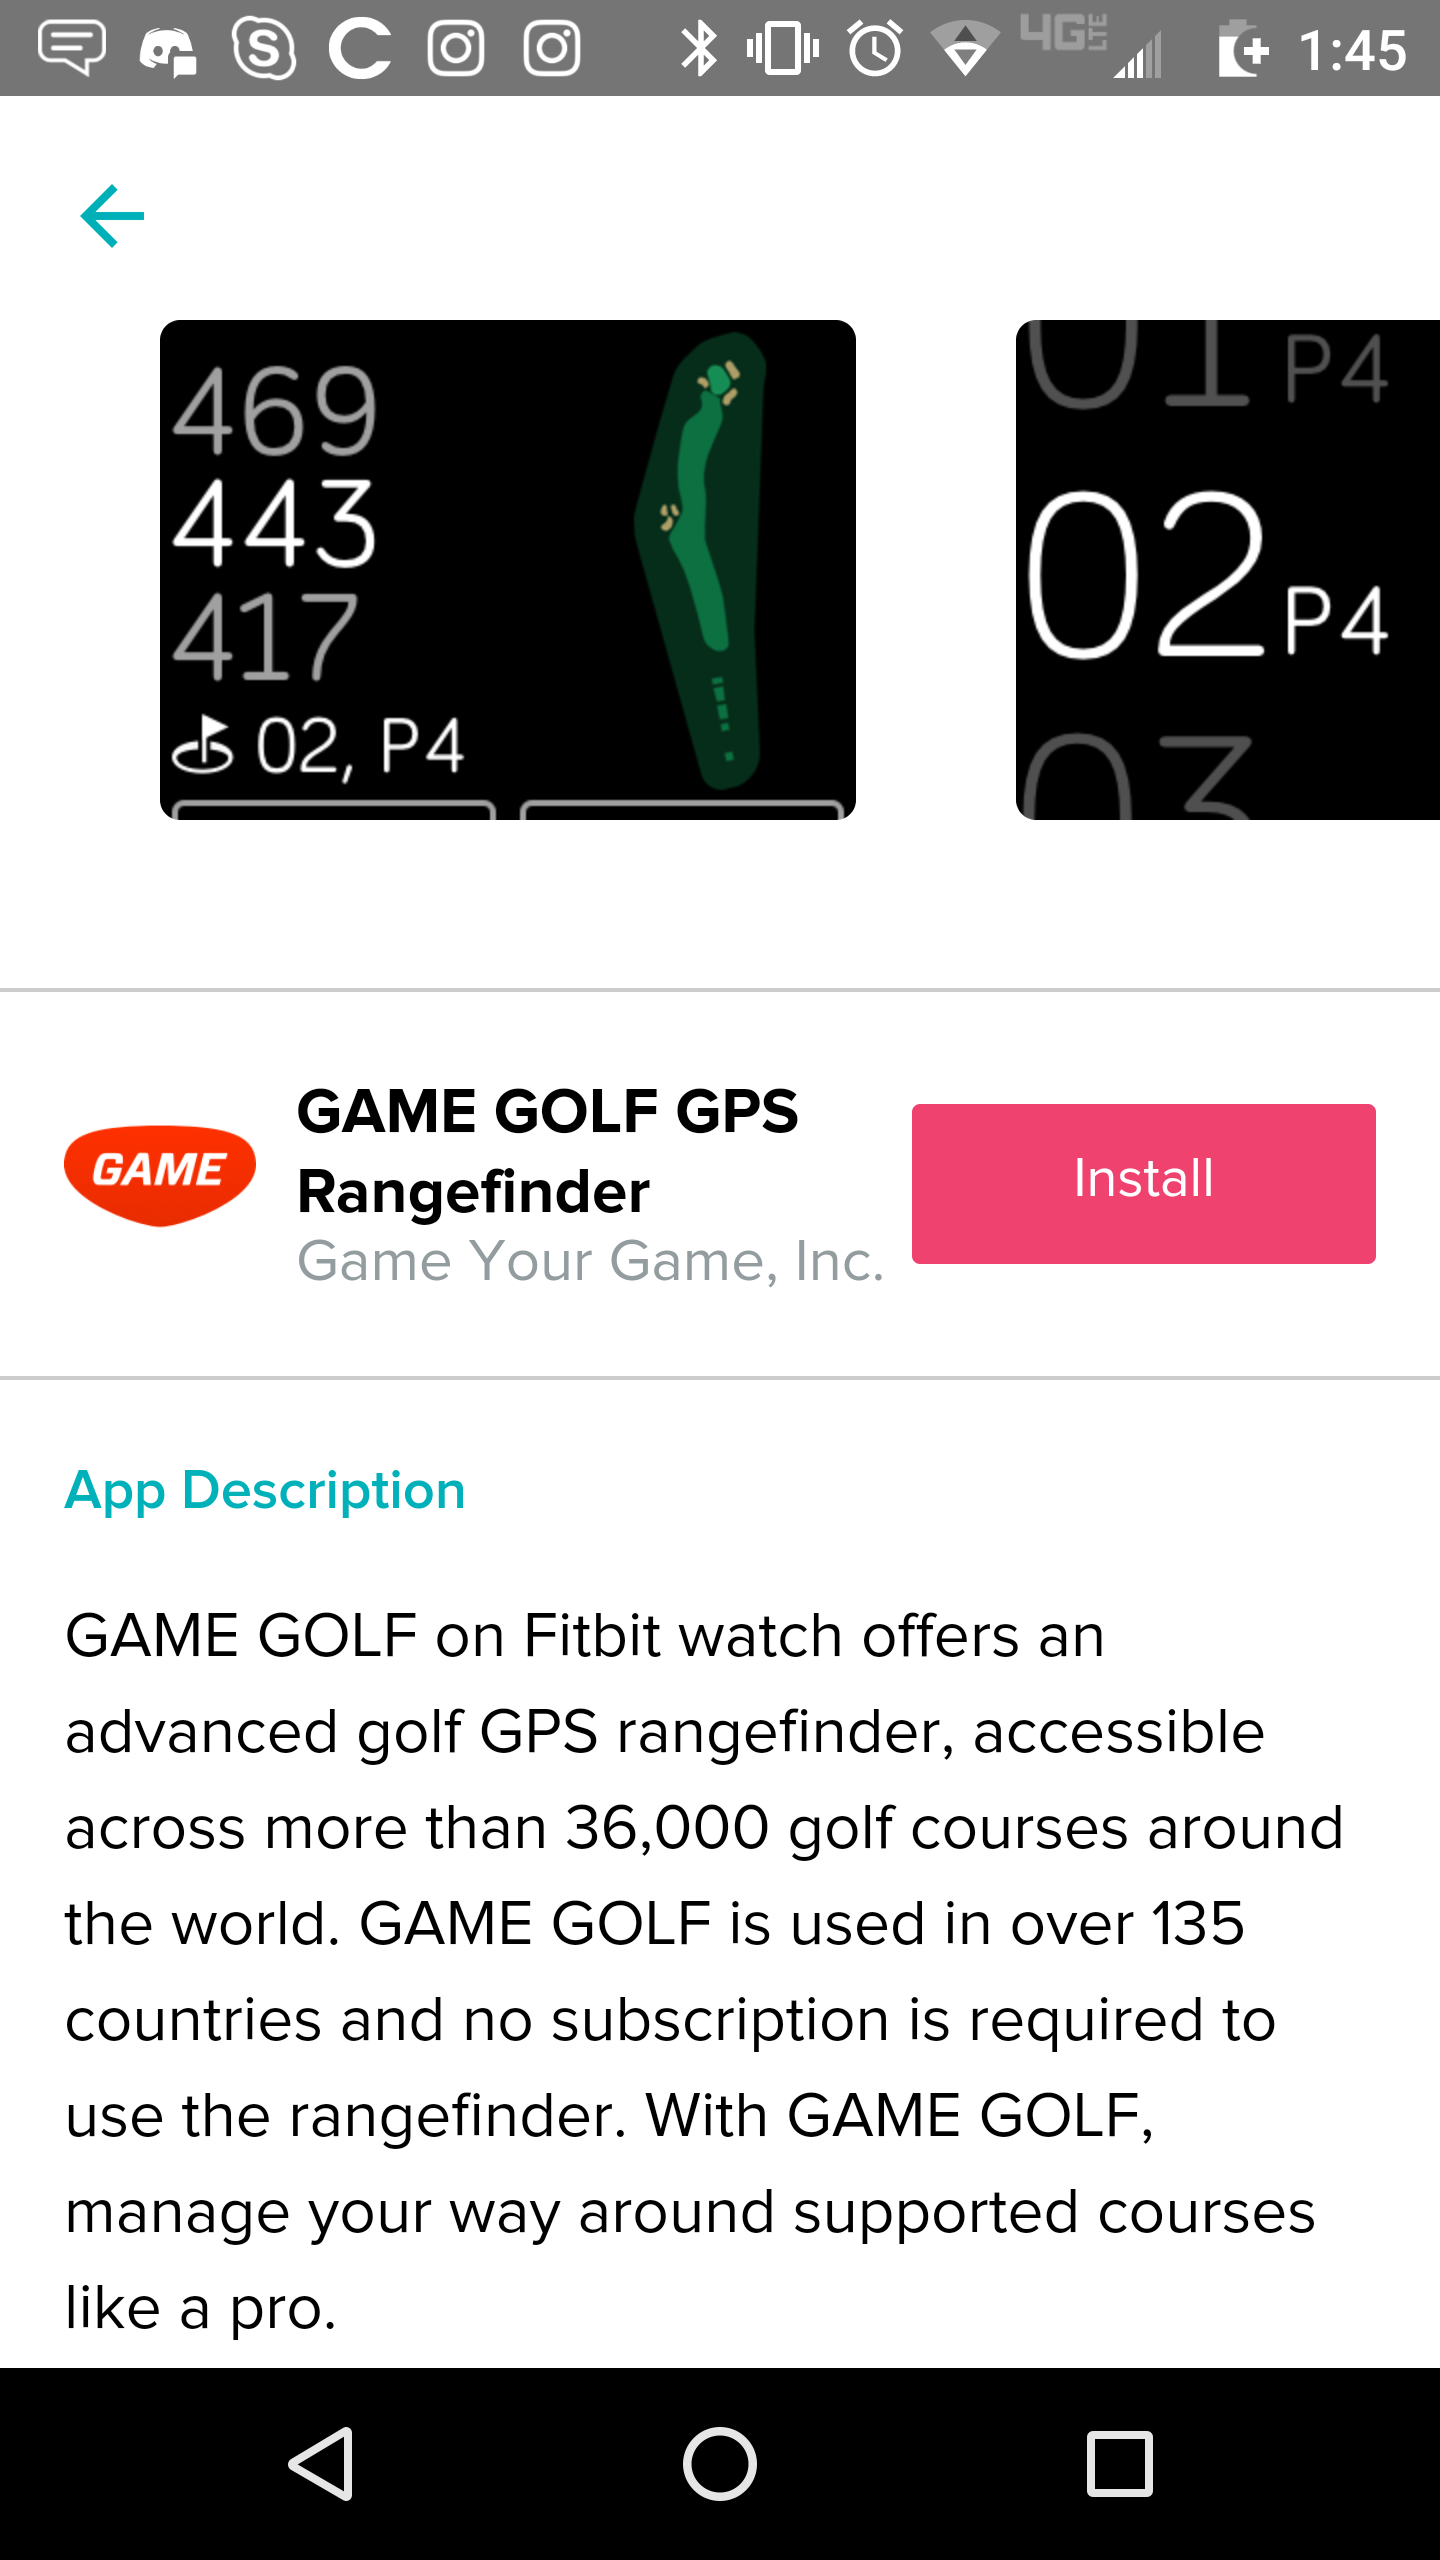 Game Golf experience - Fitbit Community